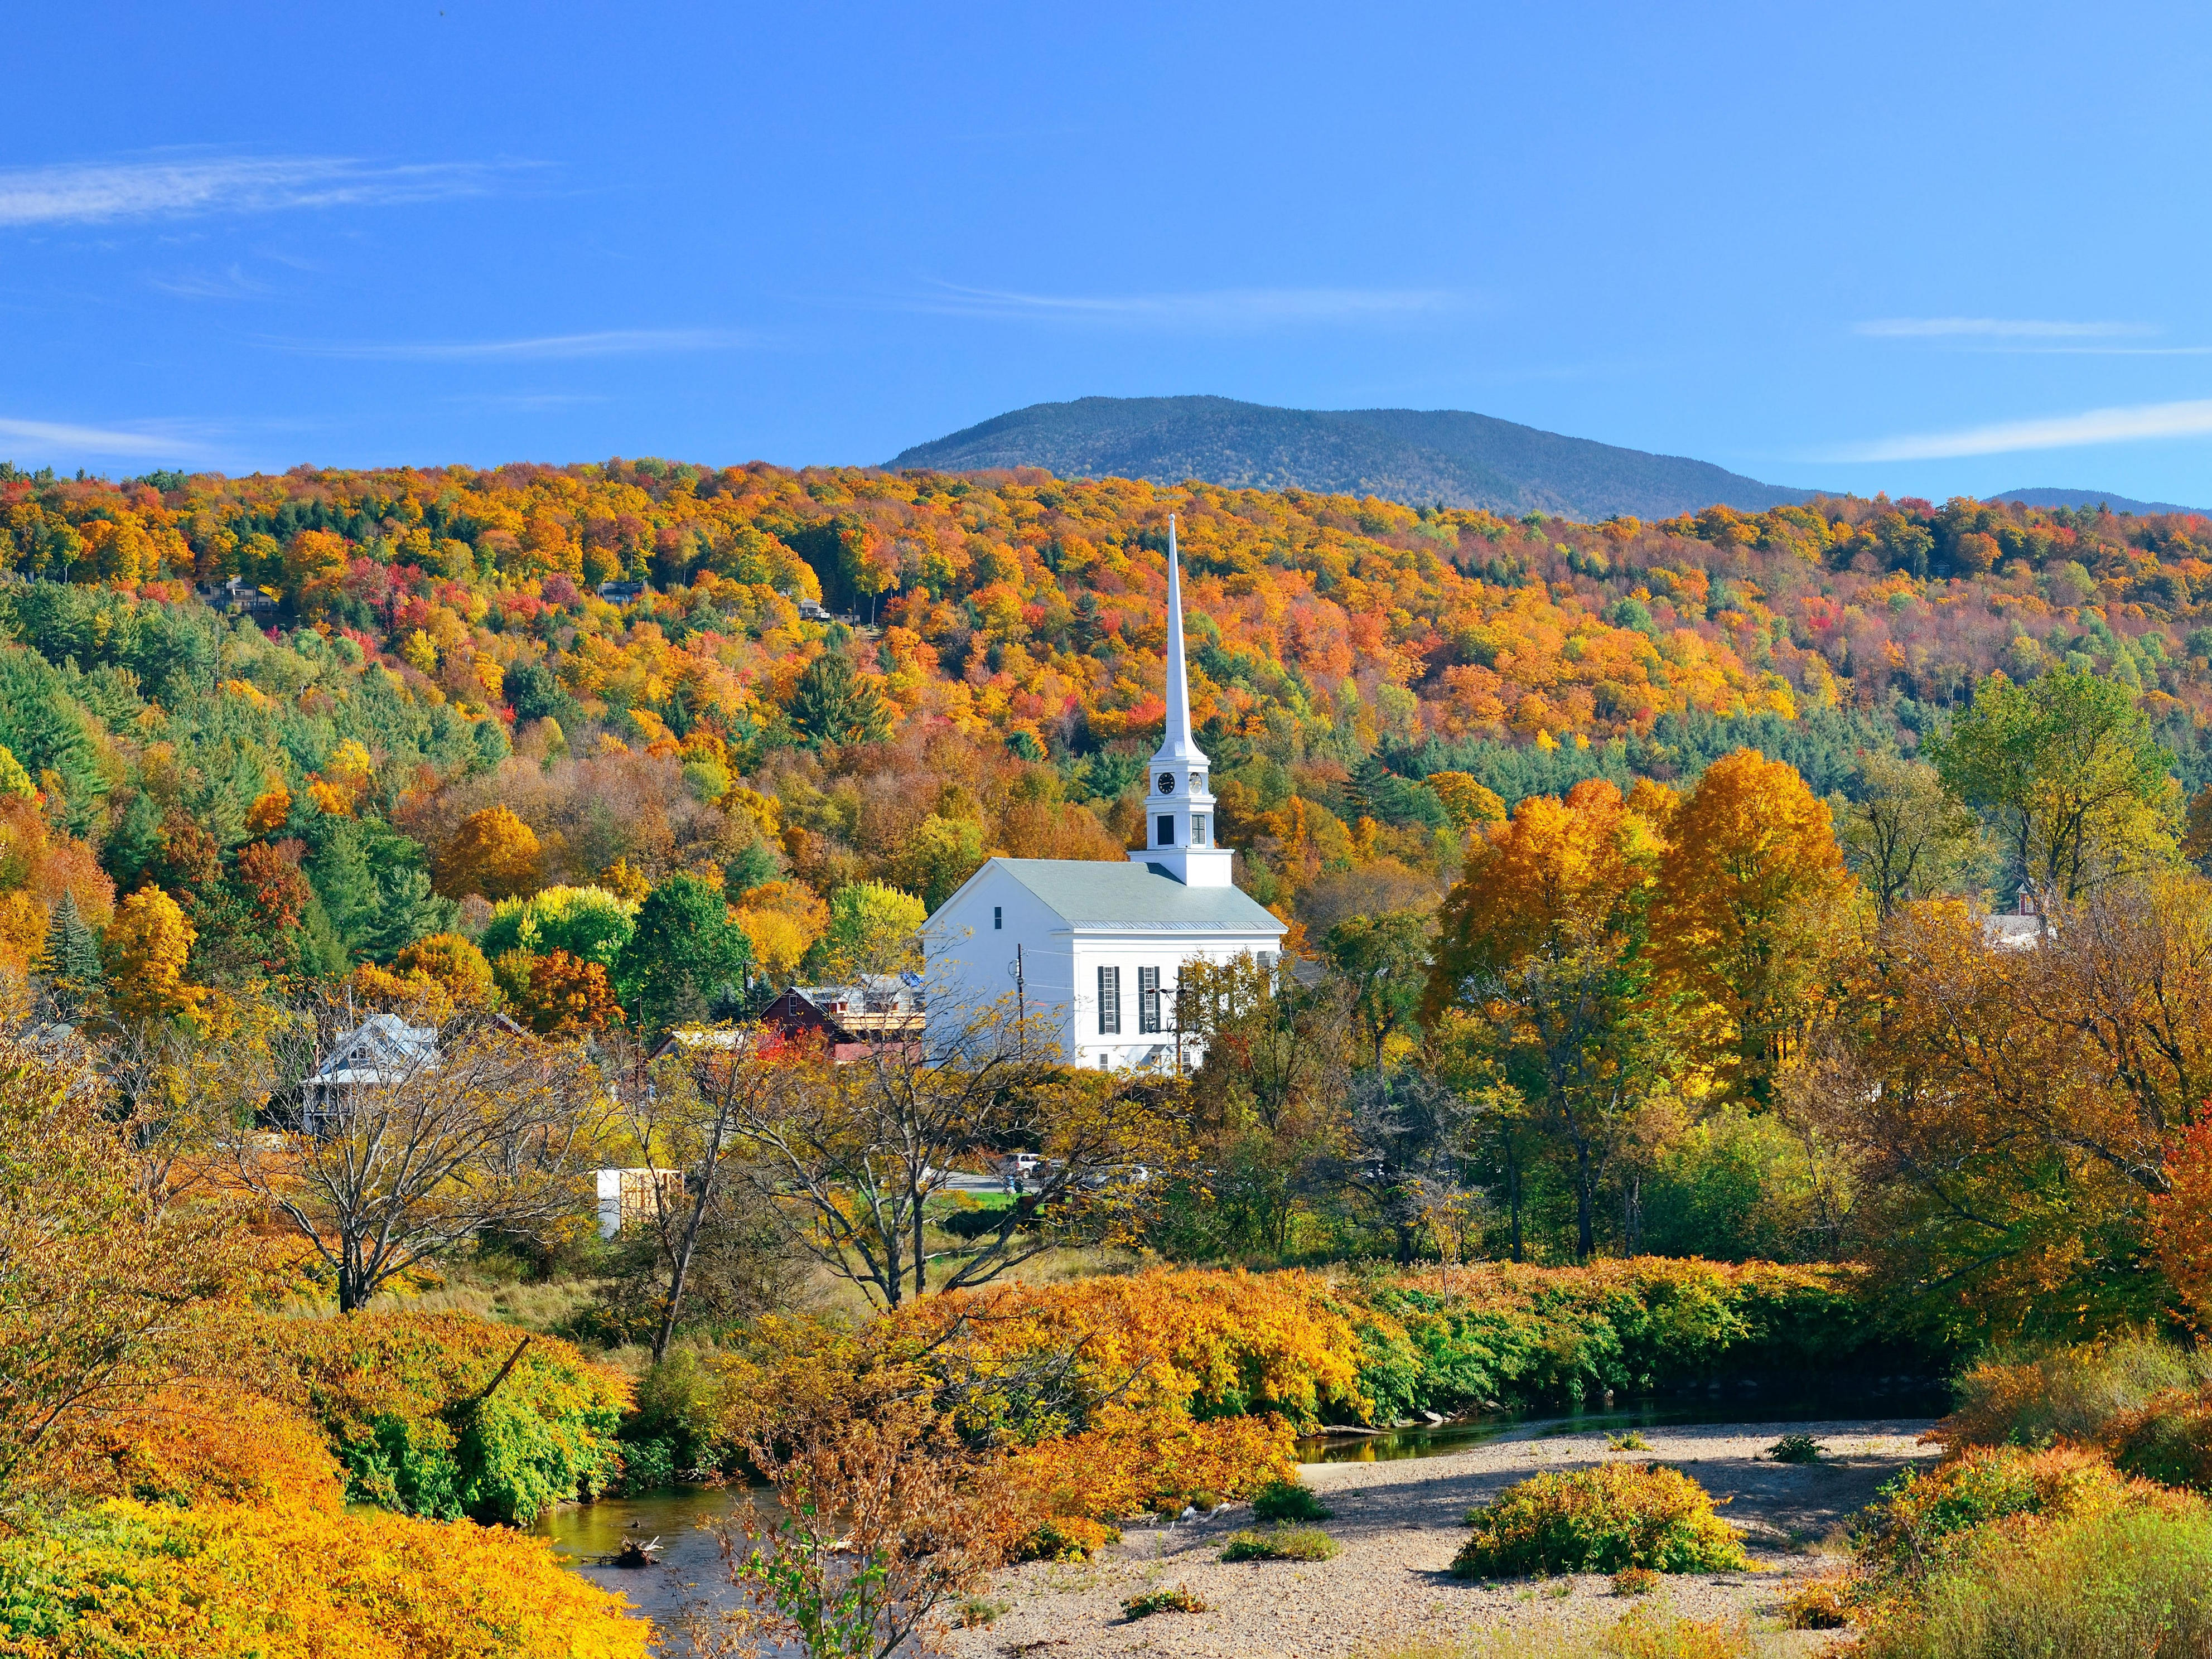 <p>Stowe is one of the most photographed places in Vermont for its quaint buildings and mountain views, according to <a href="https://www.thrillist.com/travel/nation/most-beautiful-places-in-vermont">Thrillist</a>.</p>